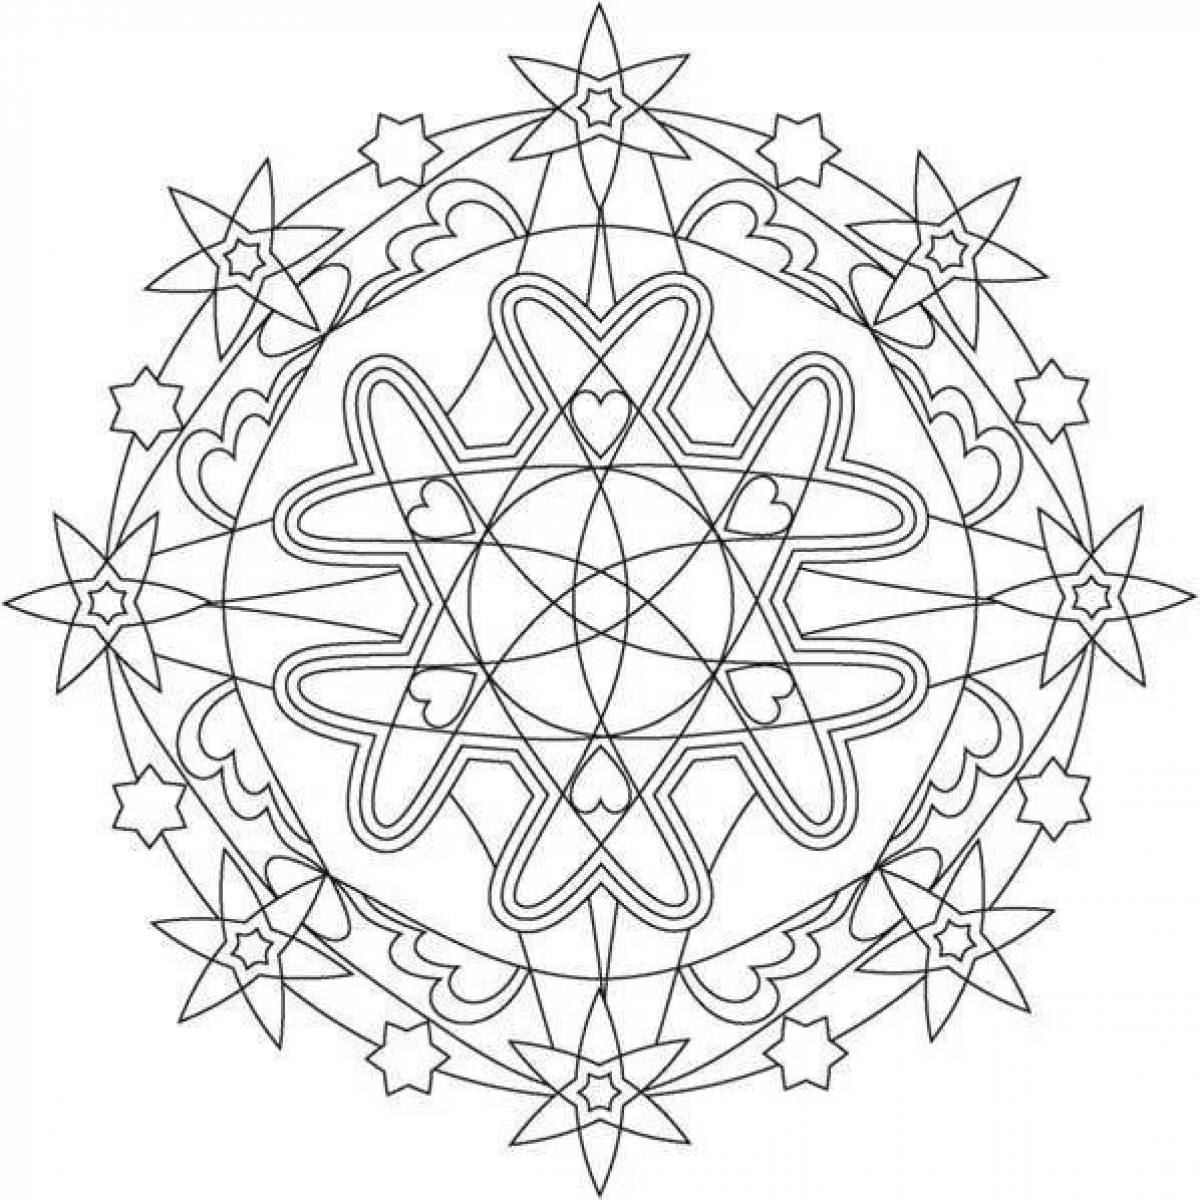 Peaceful health and wellness mandala coloring page